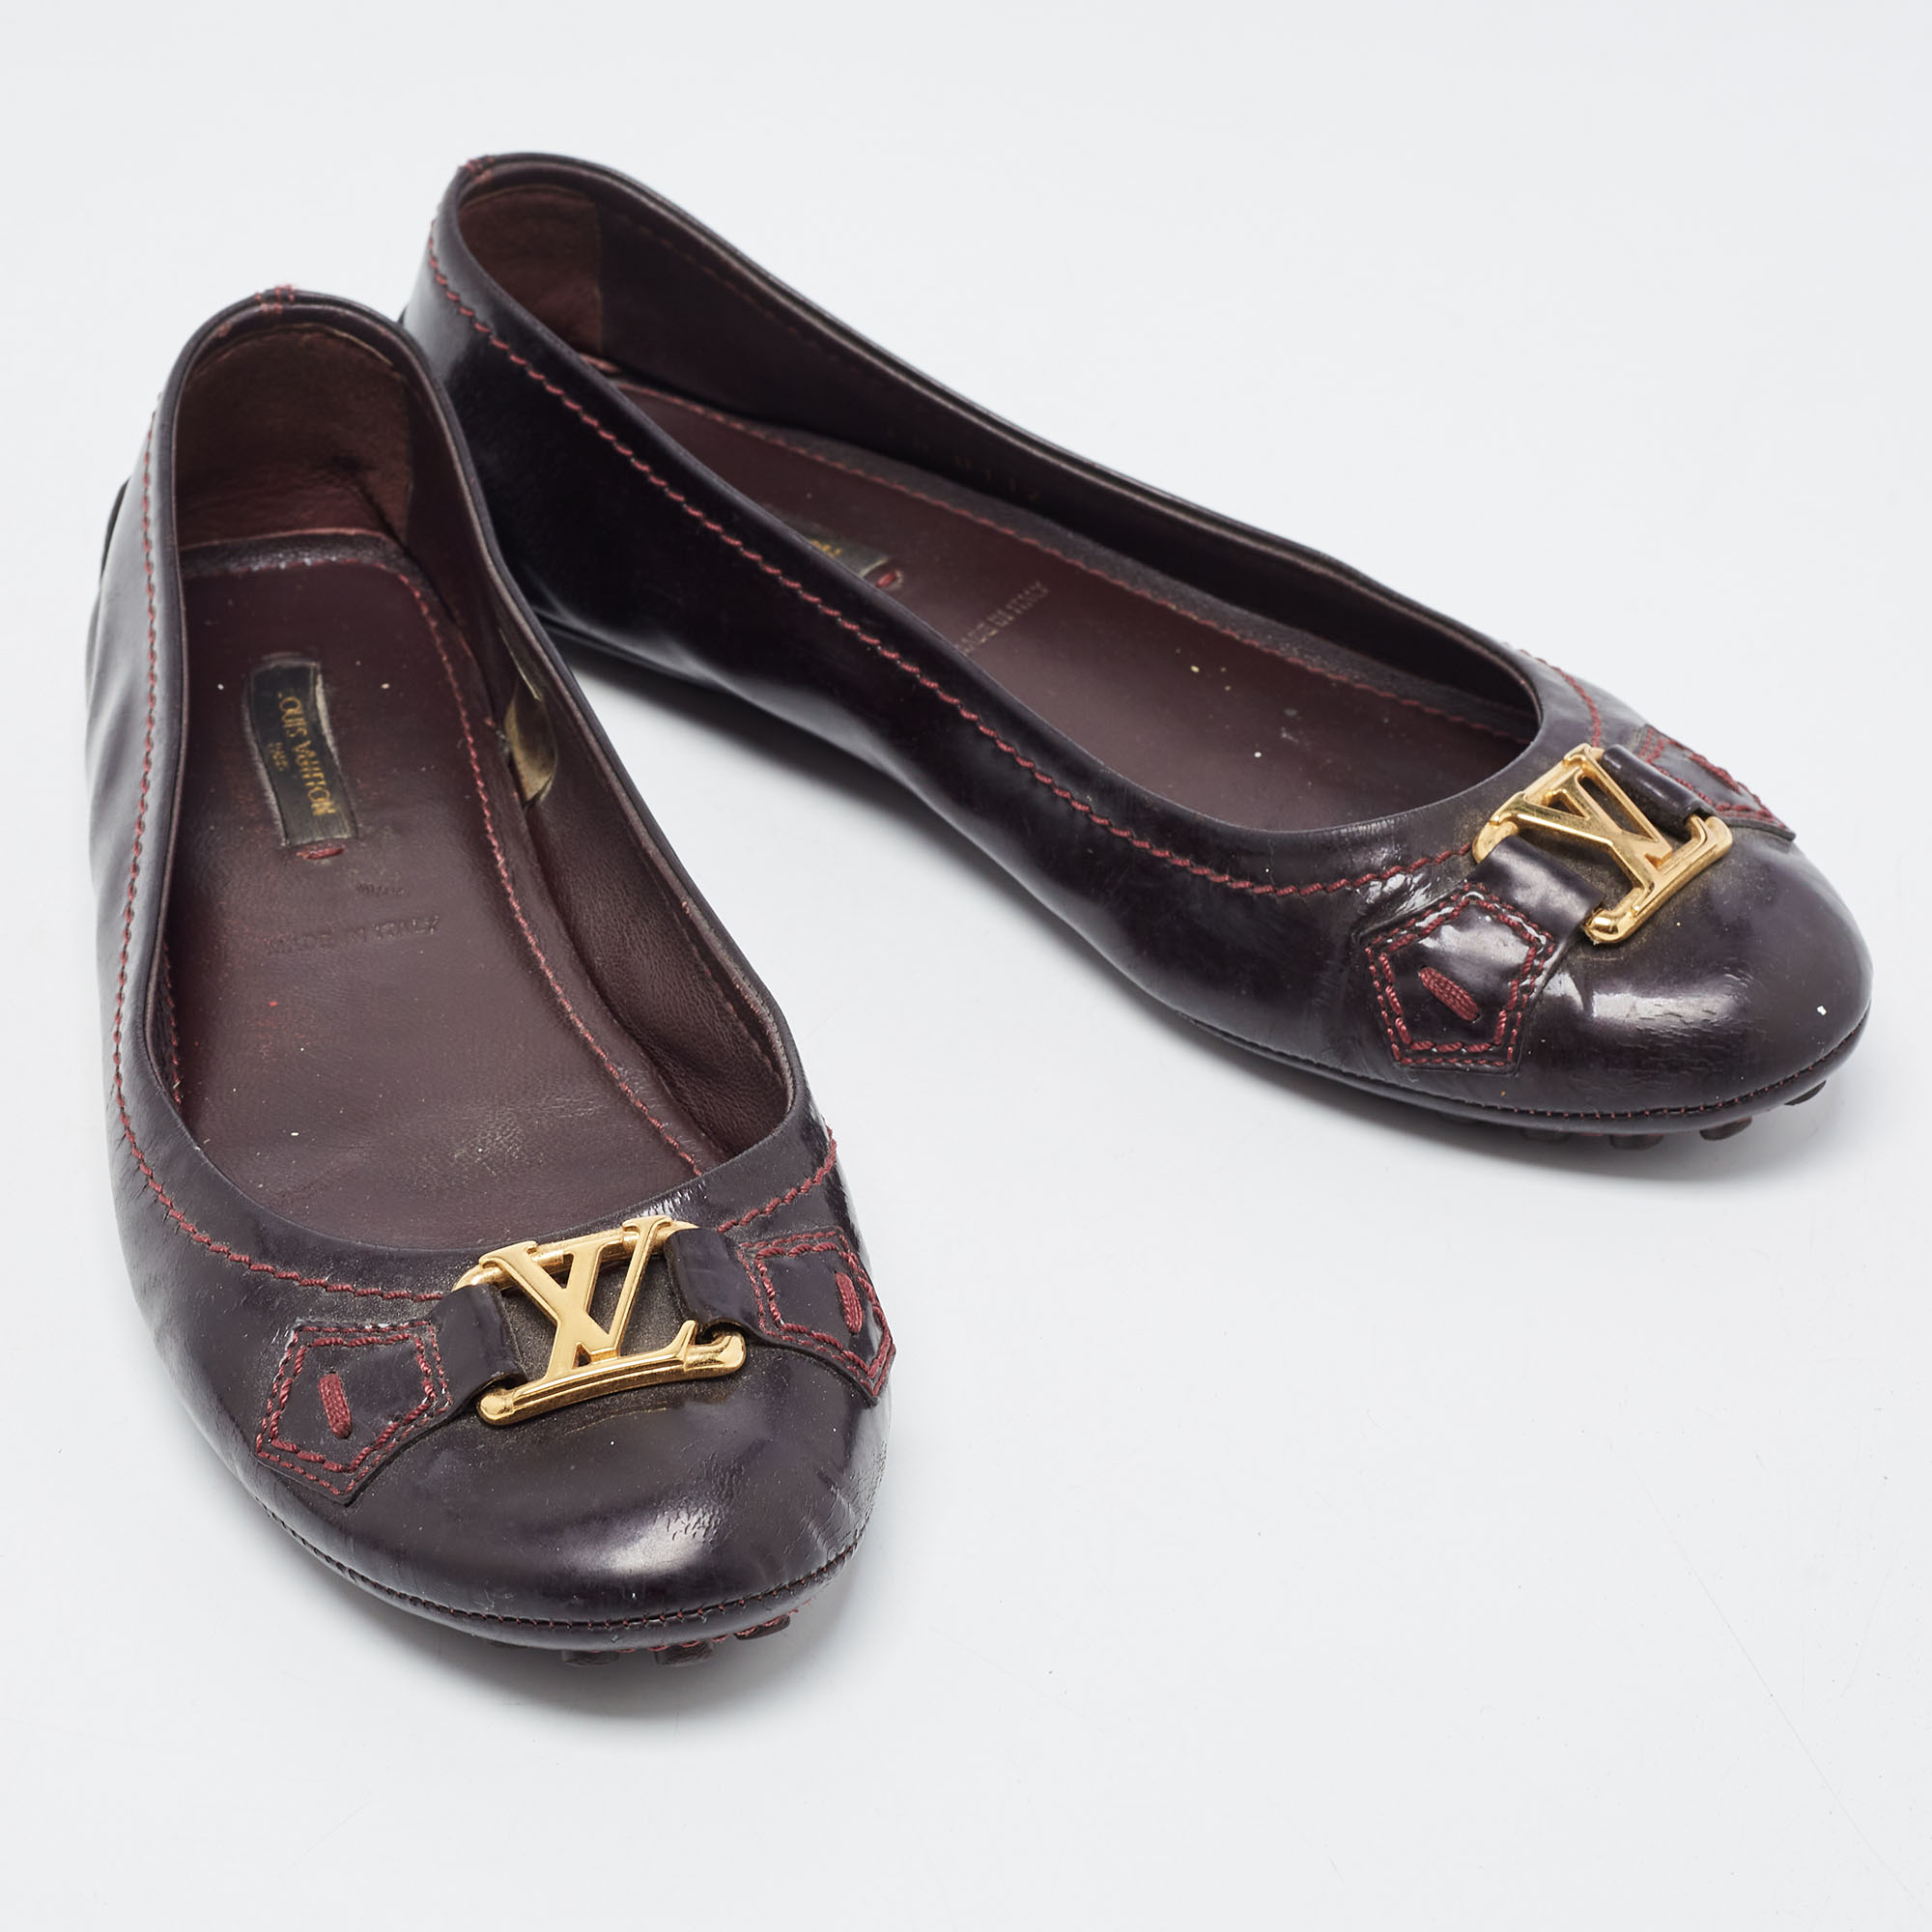 Louis Vuitton Burgundy Patent Oxford Loafers Size 37